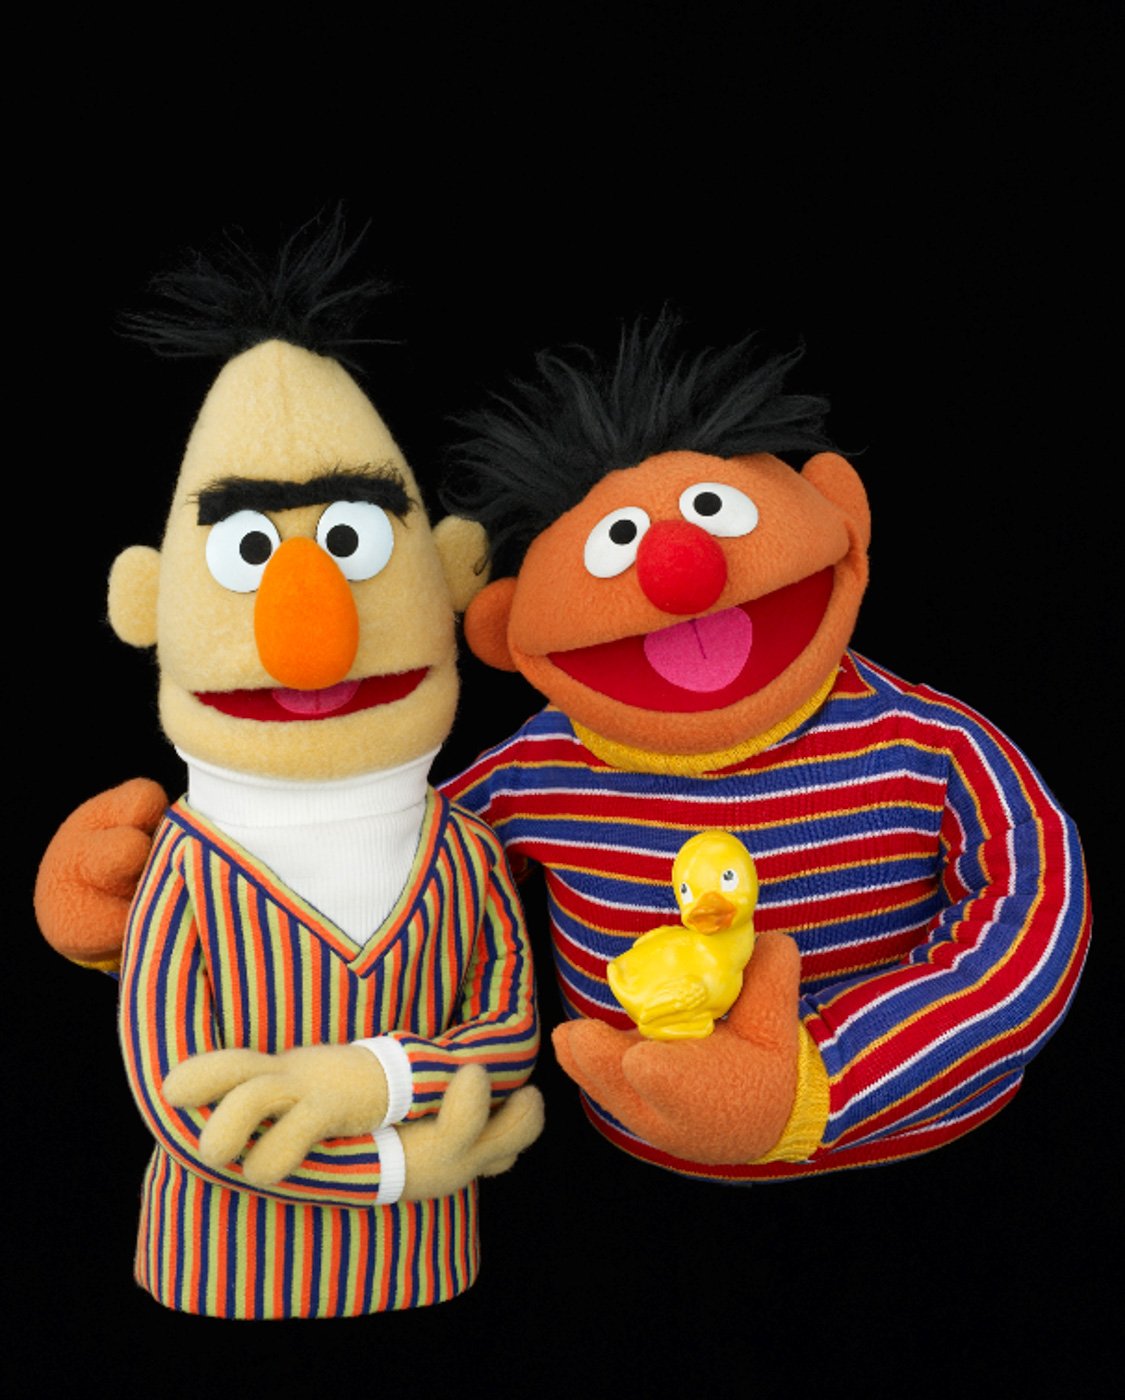 The puppets Bert and Ernie, with Ernie on the right of the image, holding a rubber duckie and with one arm around Bert